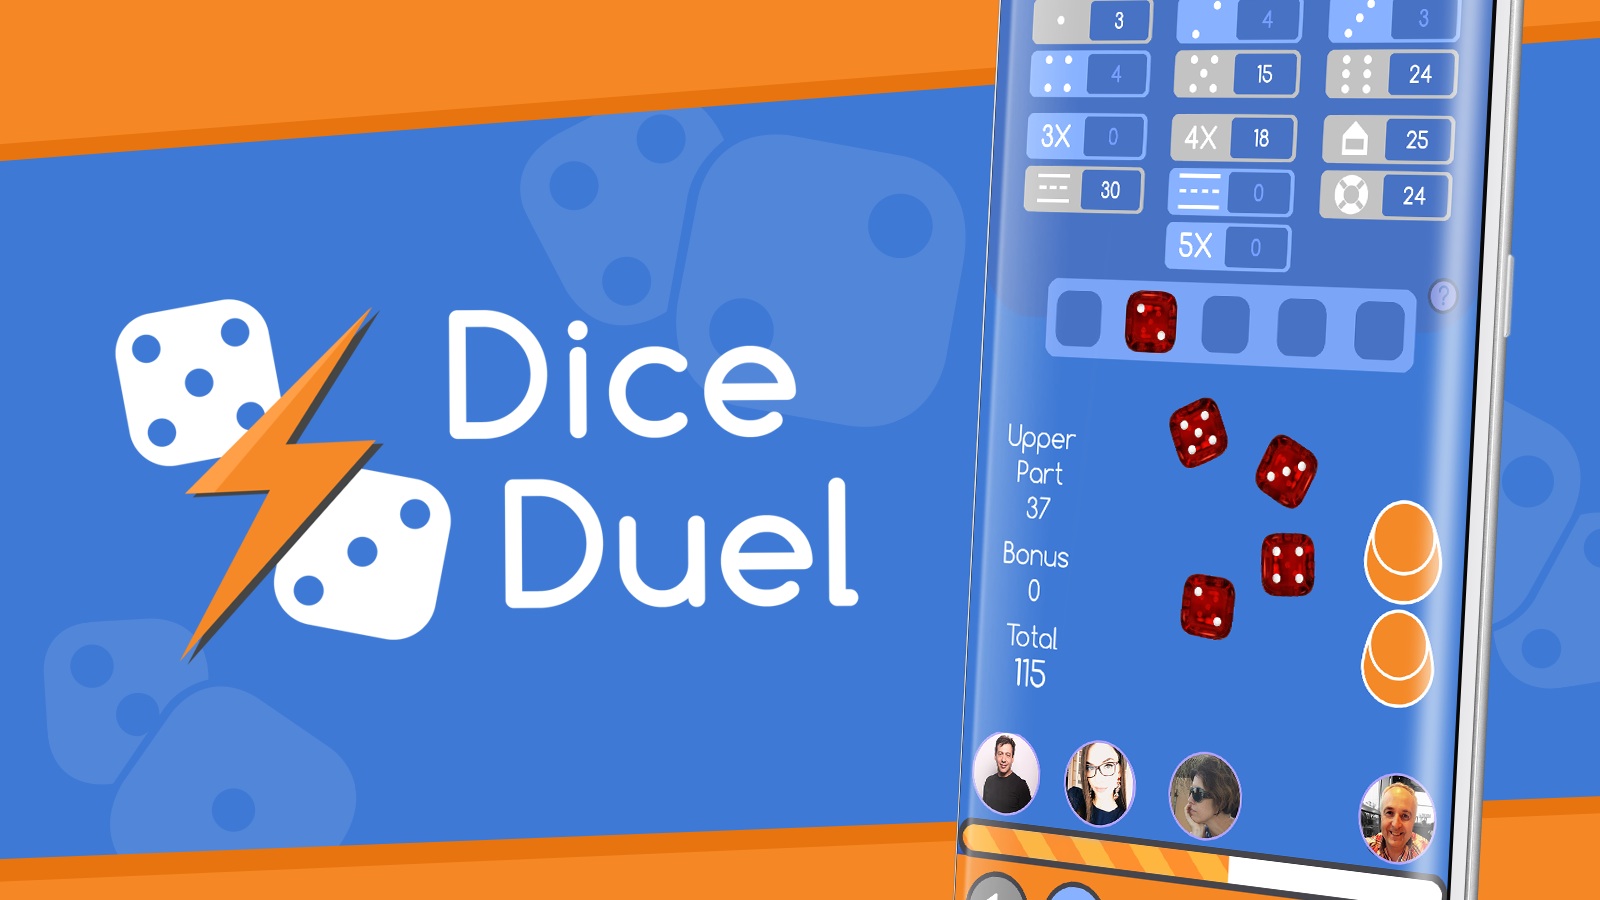 The latest Dice Duel update adds Dice Clubs to the addictive casual hit